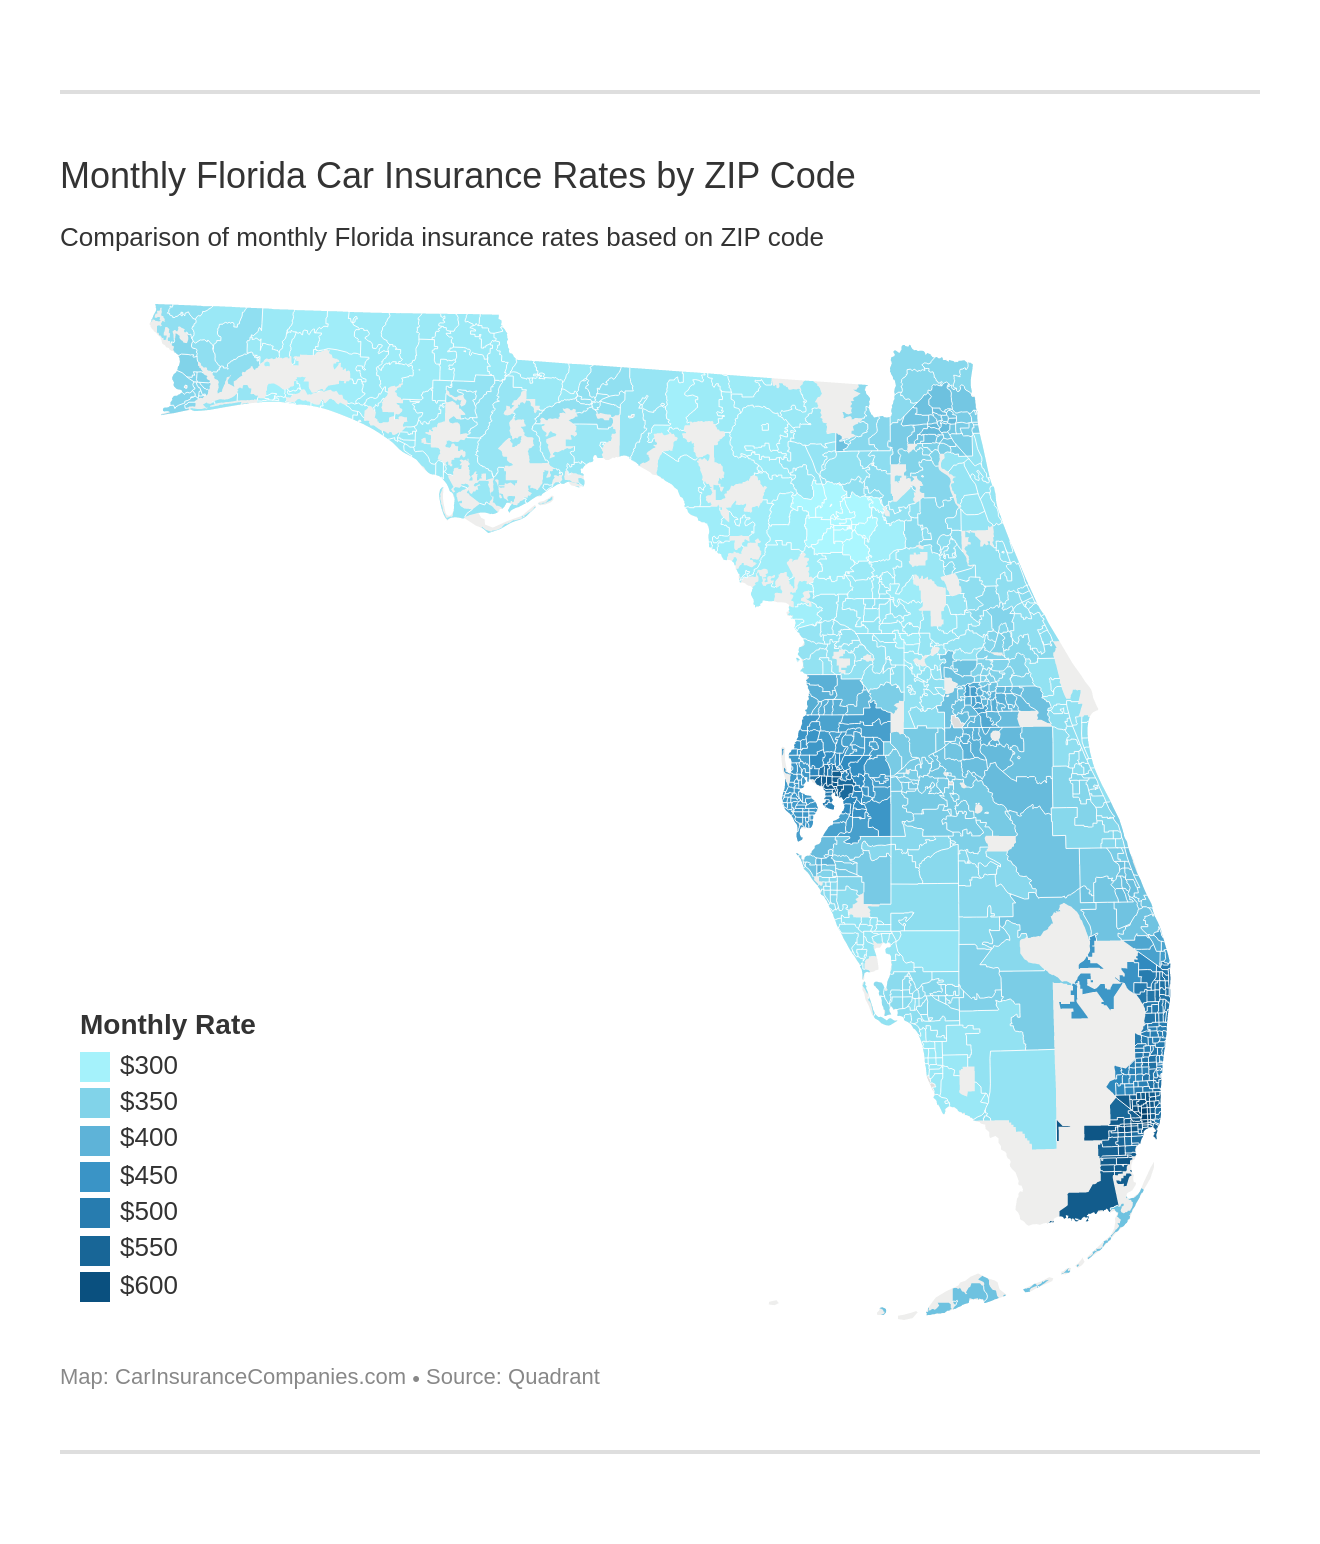 Monthly Florida Car Insurance Rates by ZIP Code